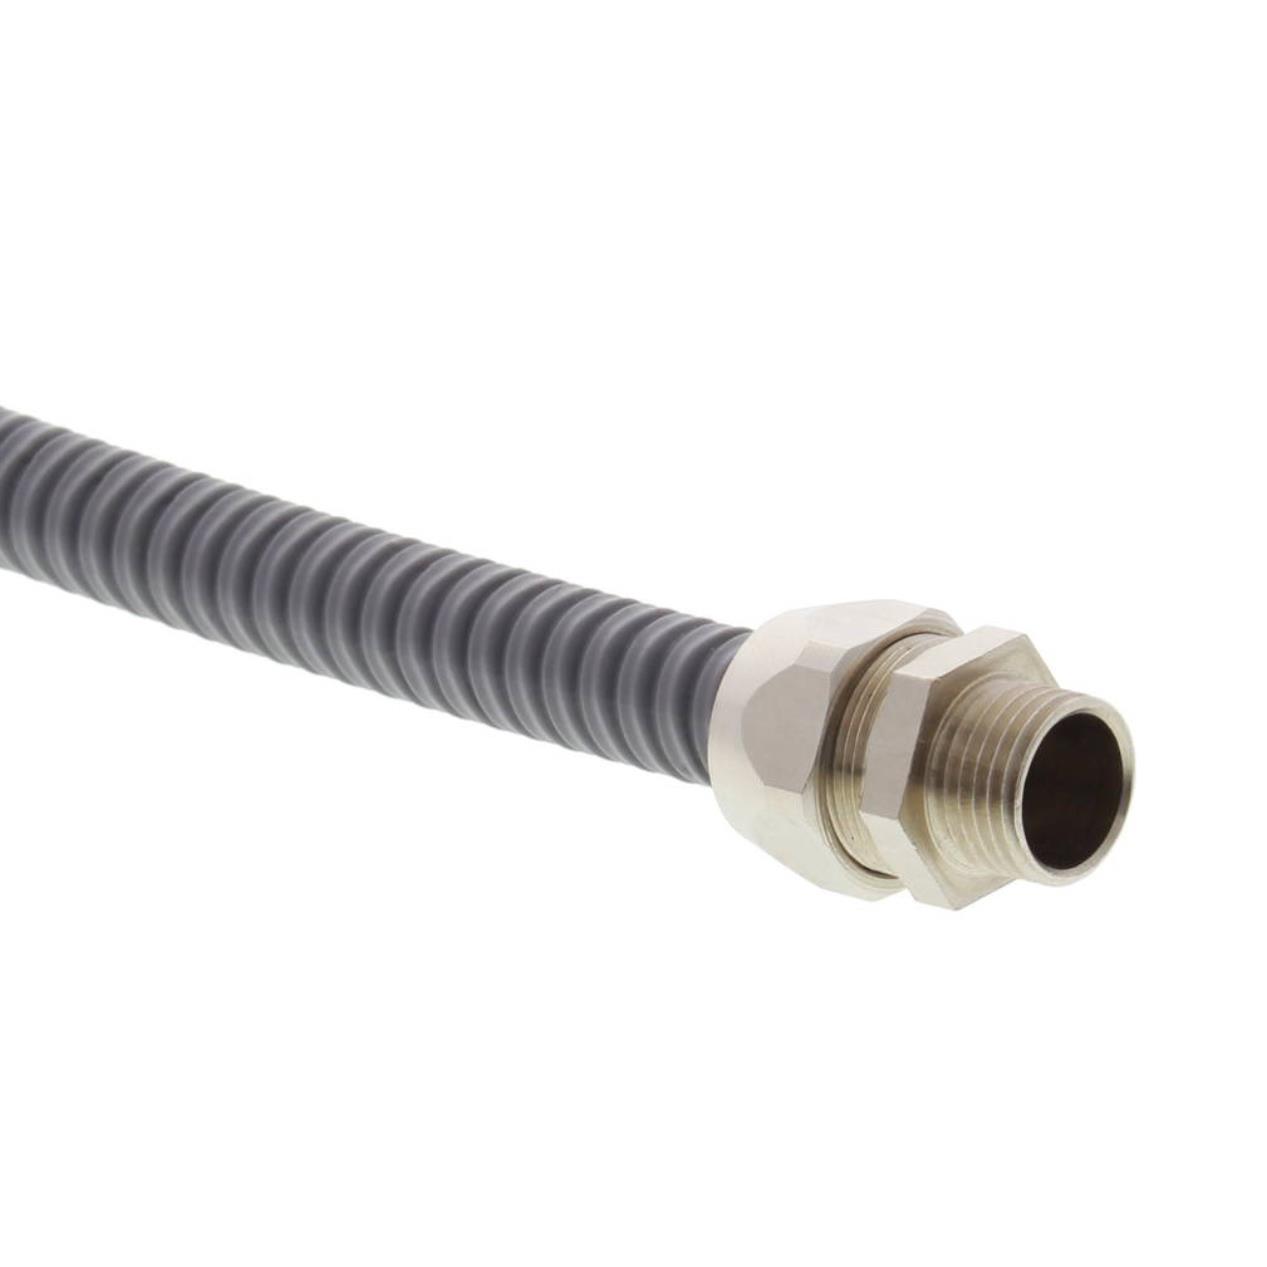 【BMCG-PVC-C-40-LG】T-CONNECTOR FOR CORRUGATED PIPES